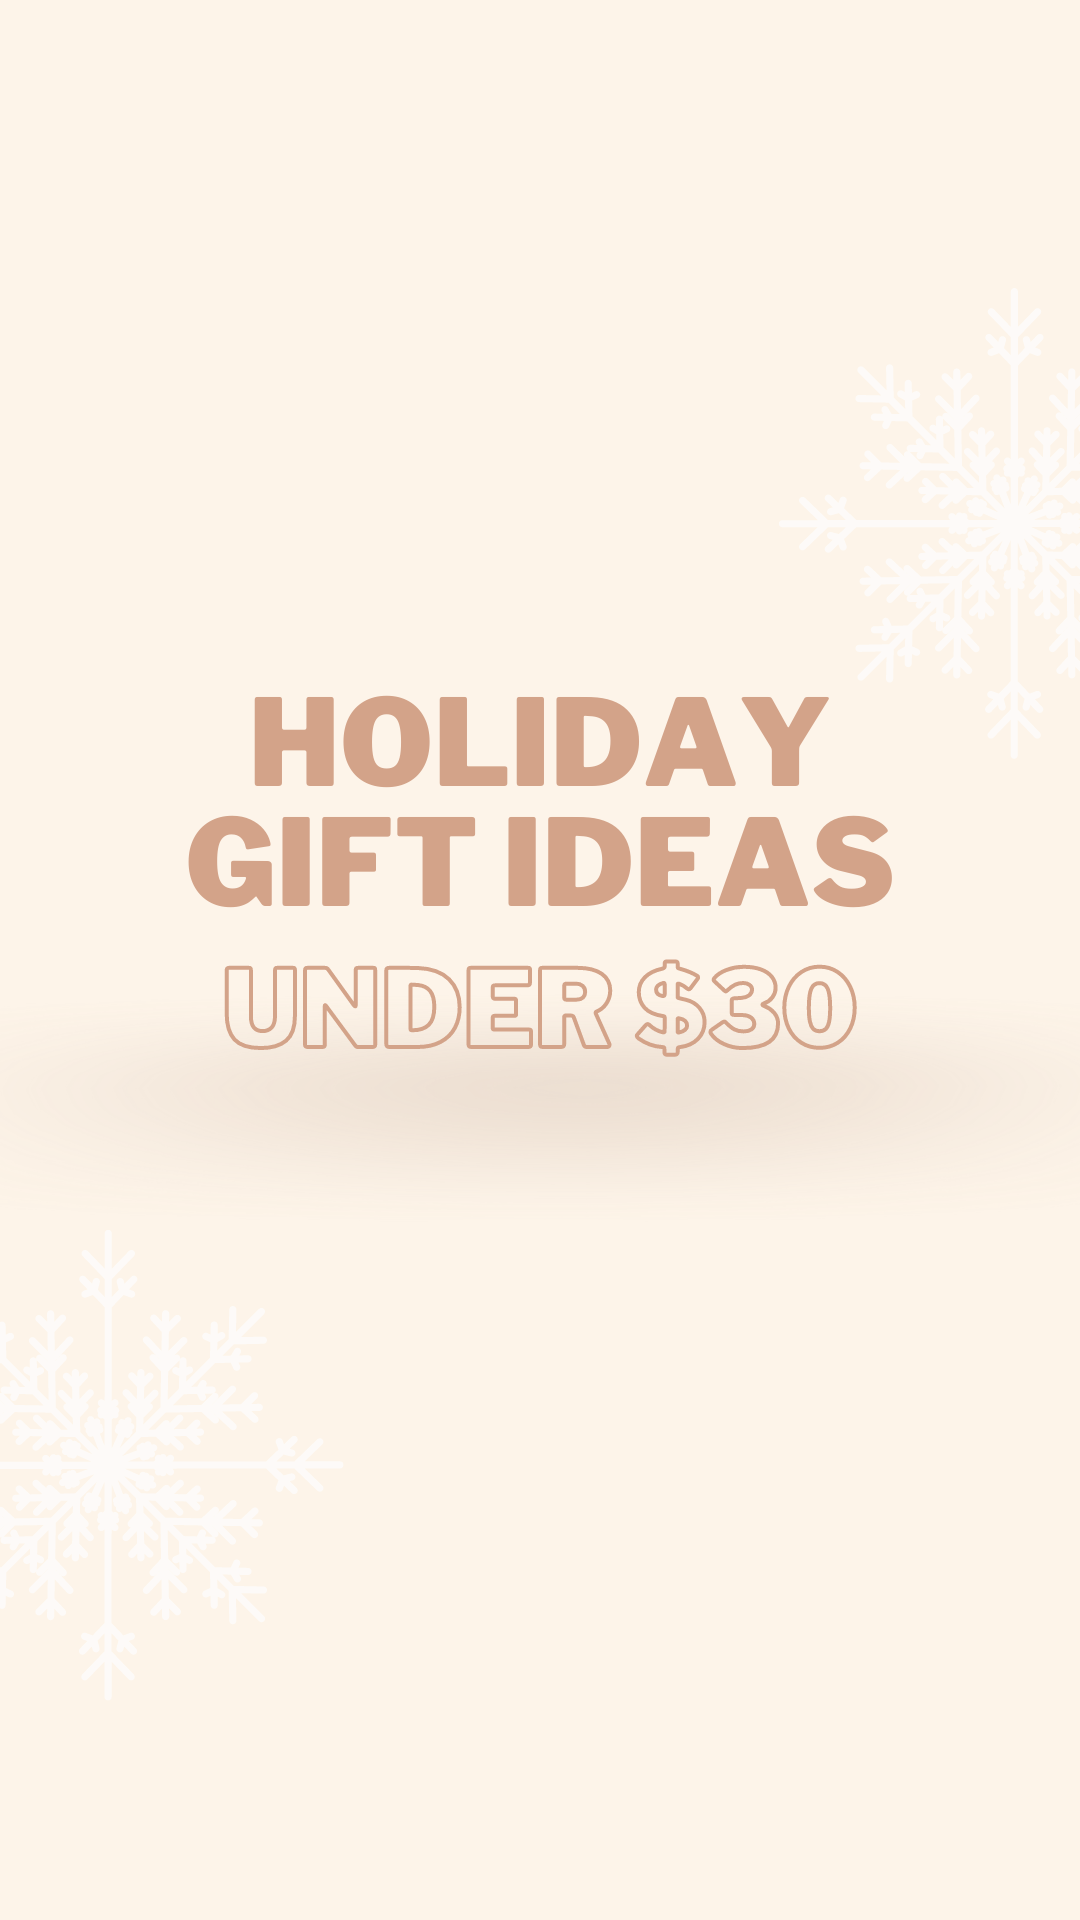 holiday gift ideas under $30